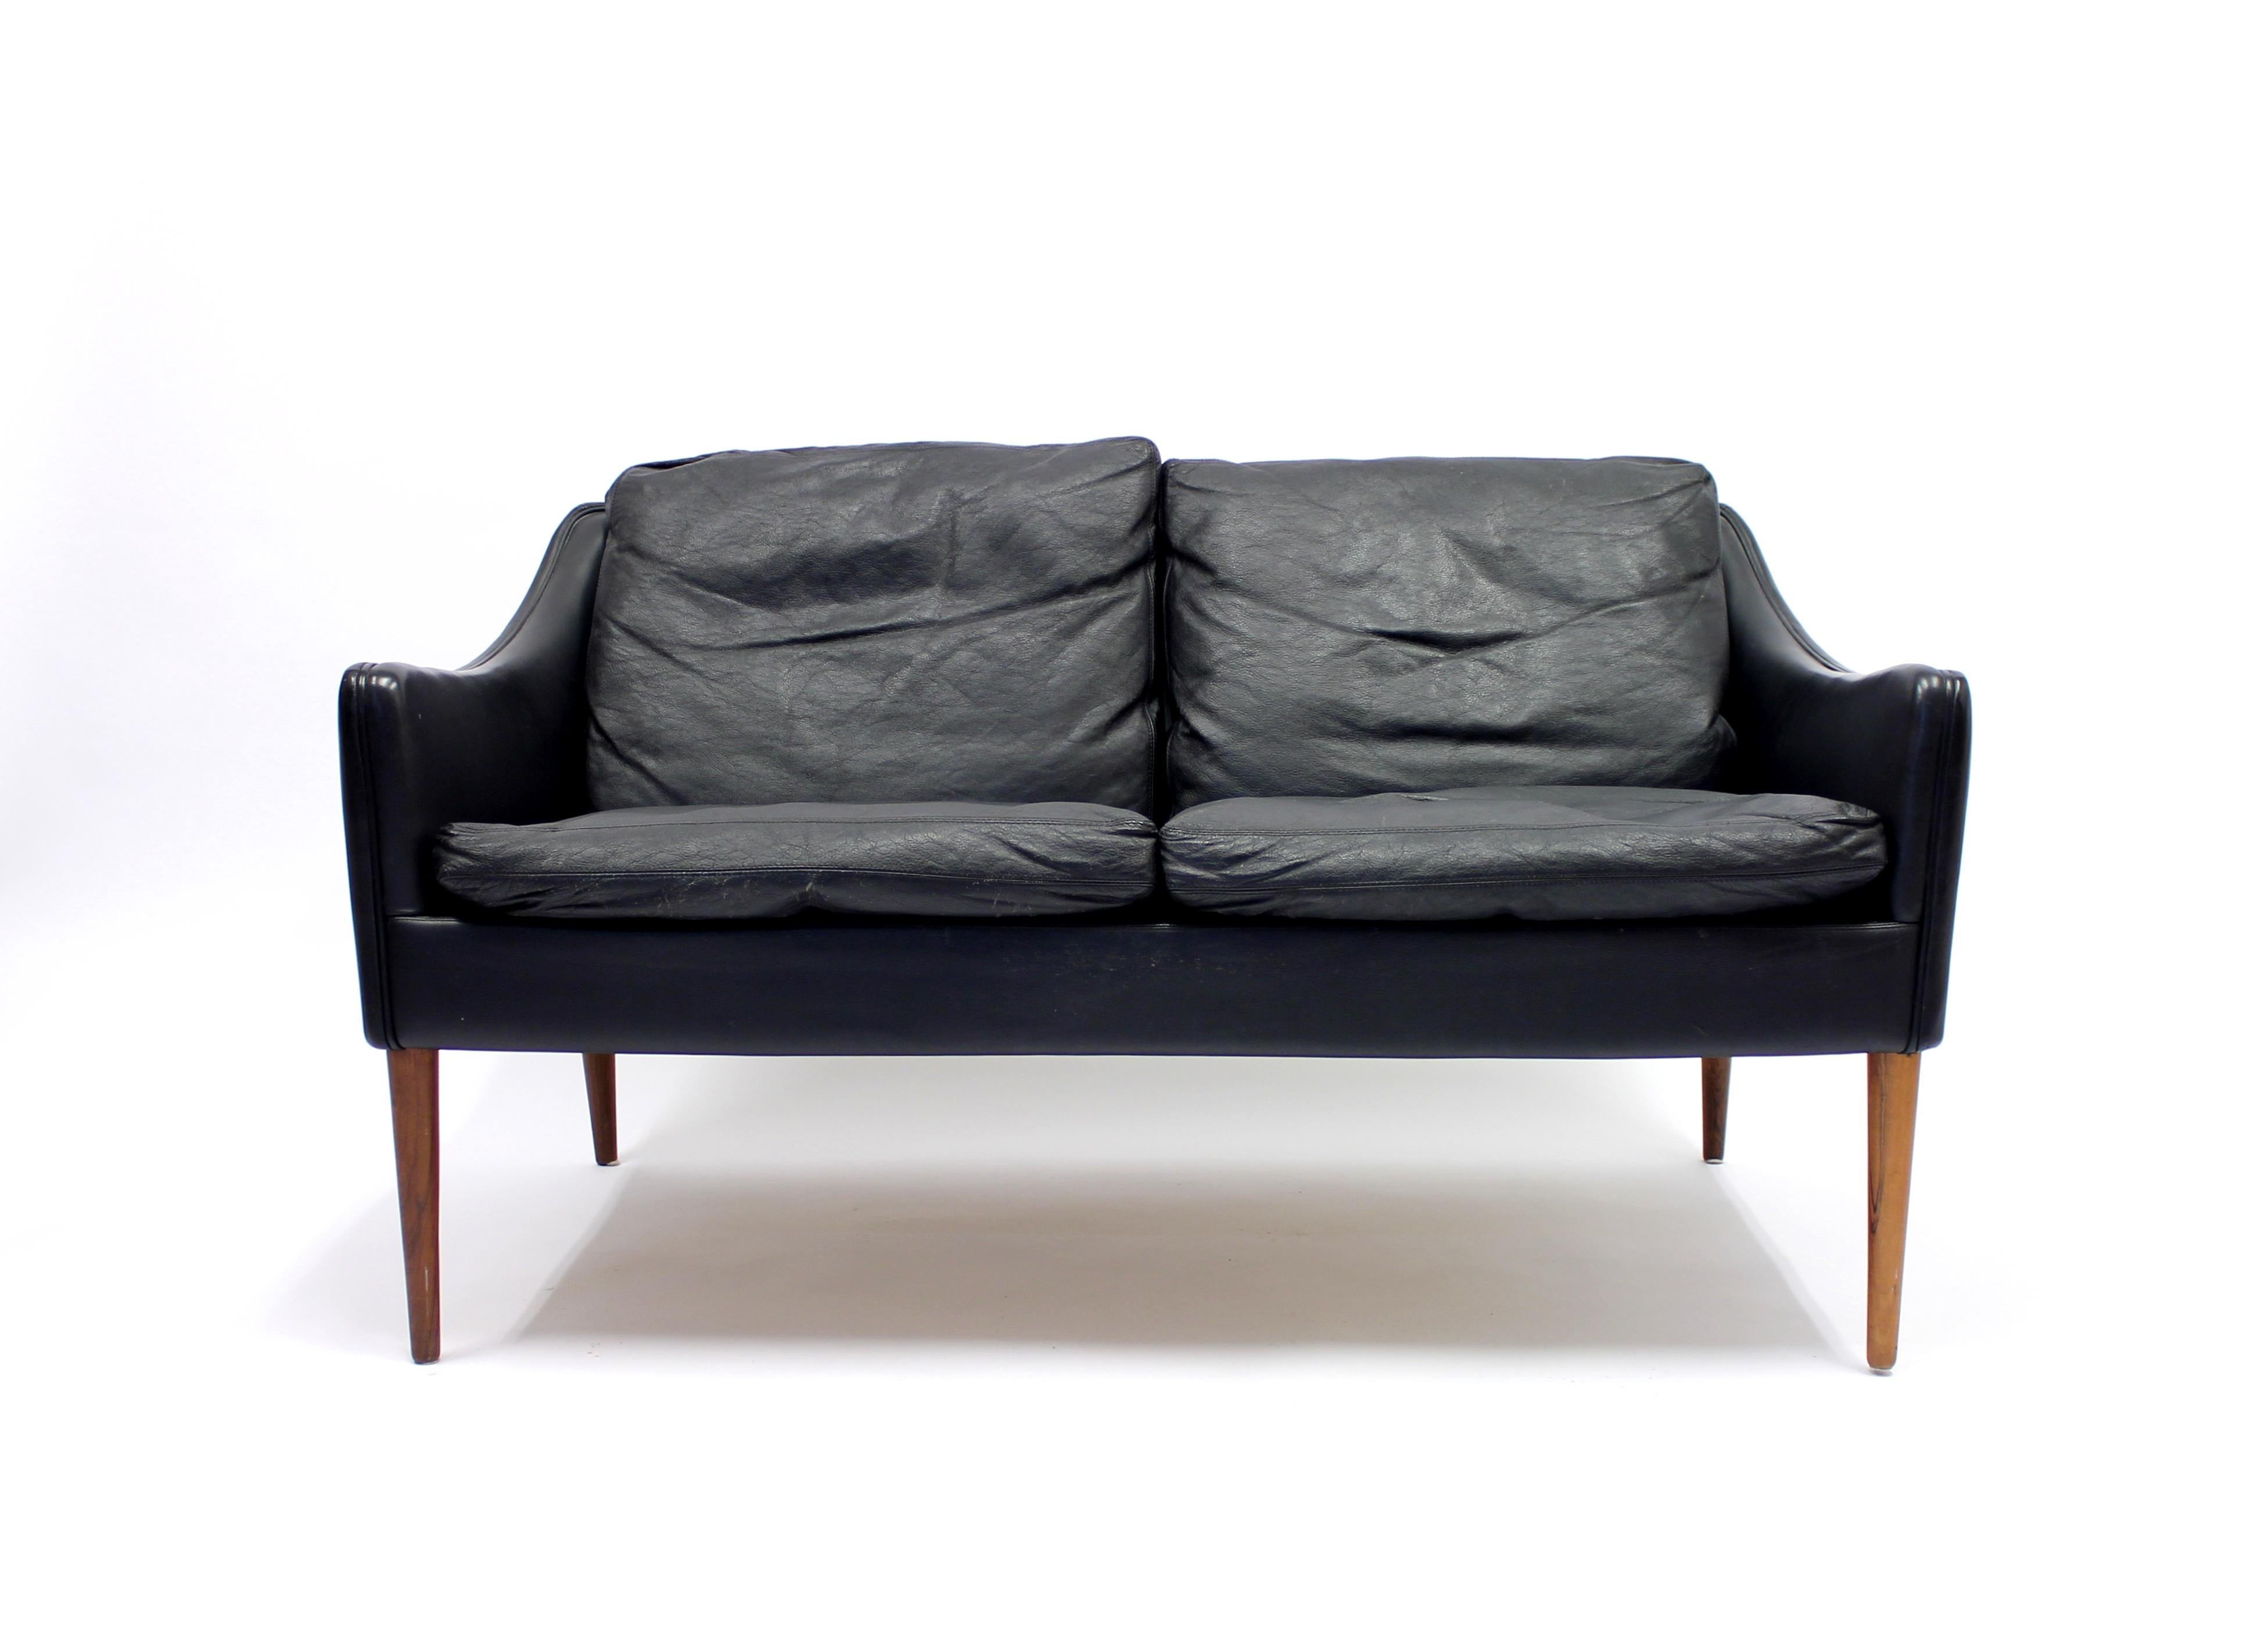 Black leather sofa on rosewood legs designed by Hans Olsen for CS Møbelfabrik in the 1960s. Normal patina consistent with age and use. Original condition. On the outside of the right arm rest occurs a bit of ware that has been professionally